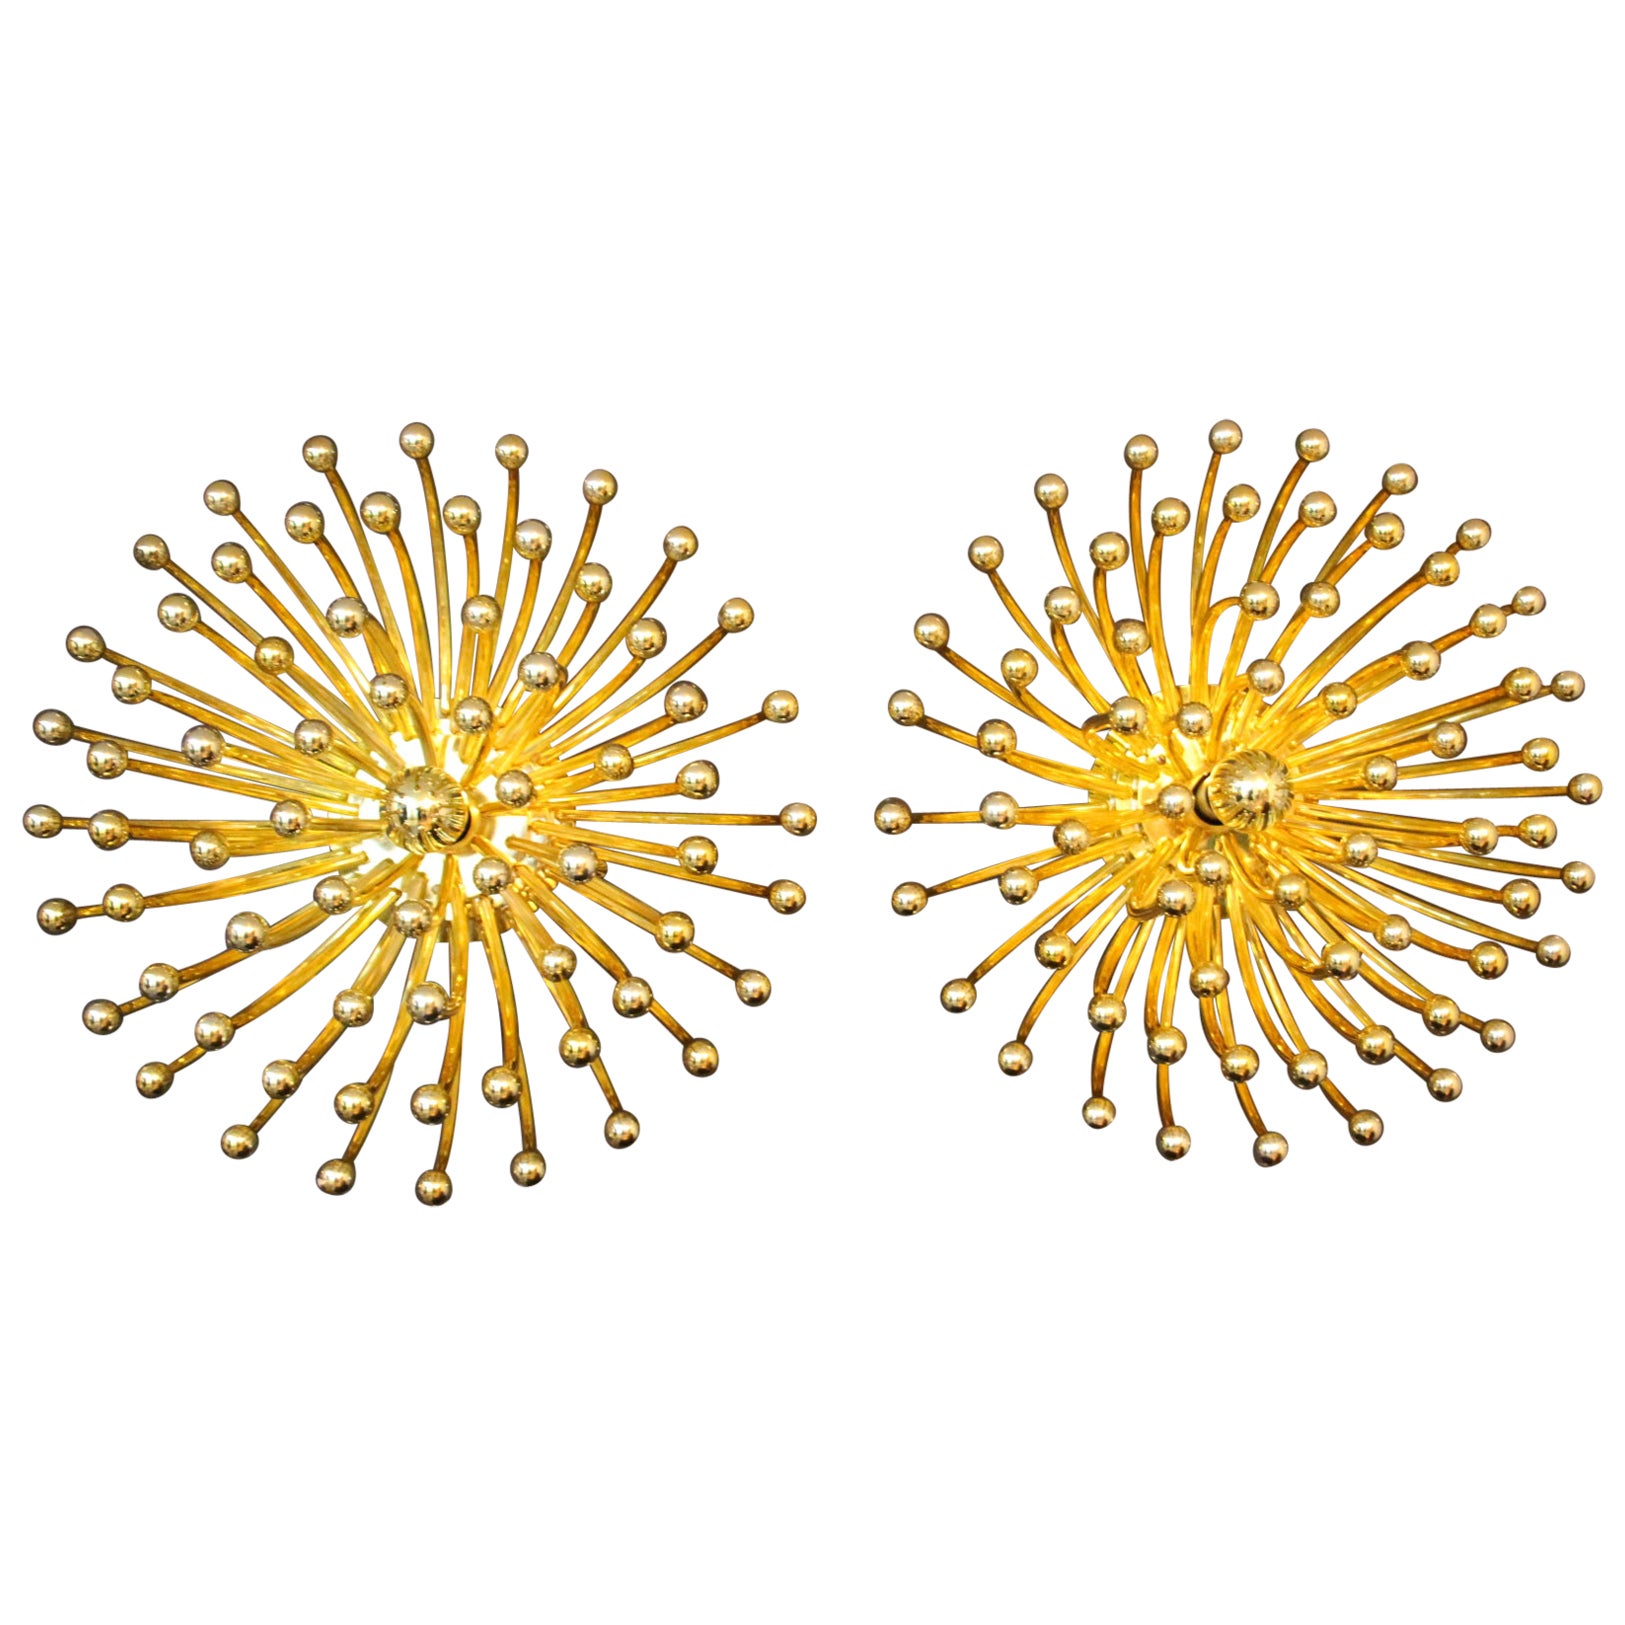 Pair of Gold Pistillo Chandeliers, table lamps or Wall Lamps By Valenti Milano